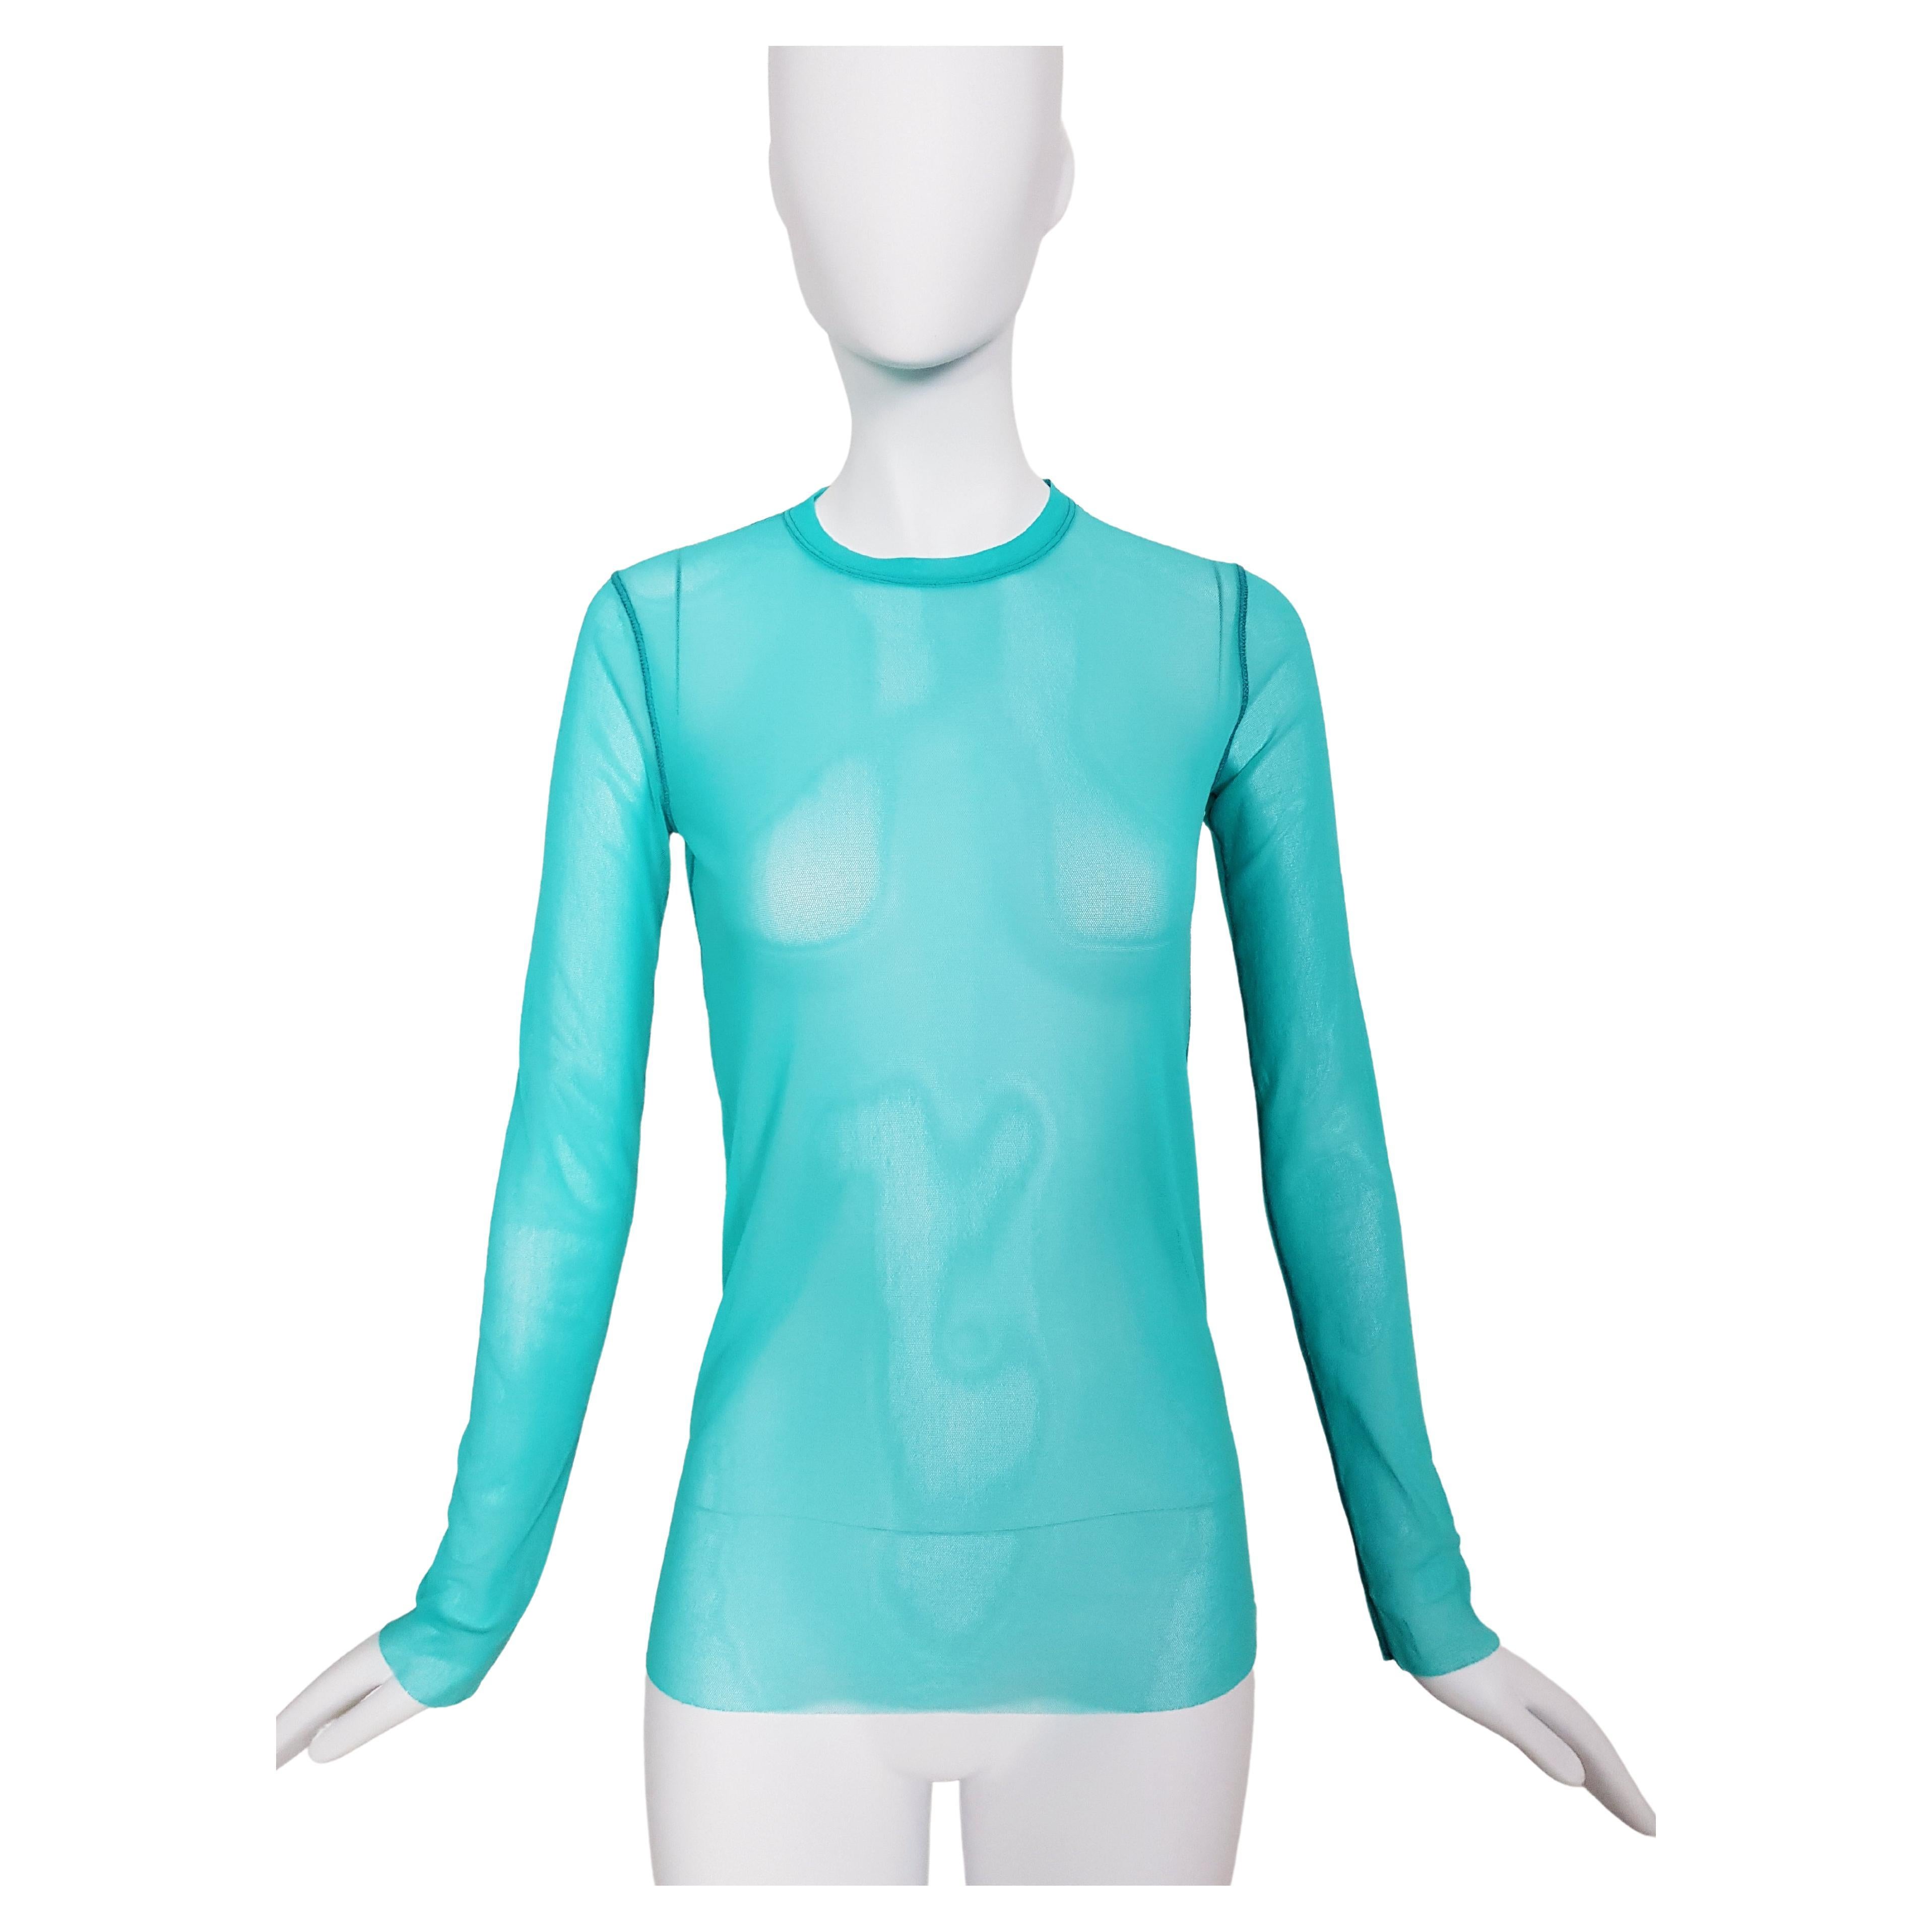 JEAN PAUL GAULTIER Maille turquoise mesh shirt Y2K For Sale